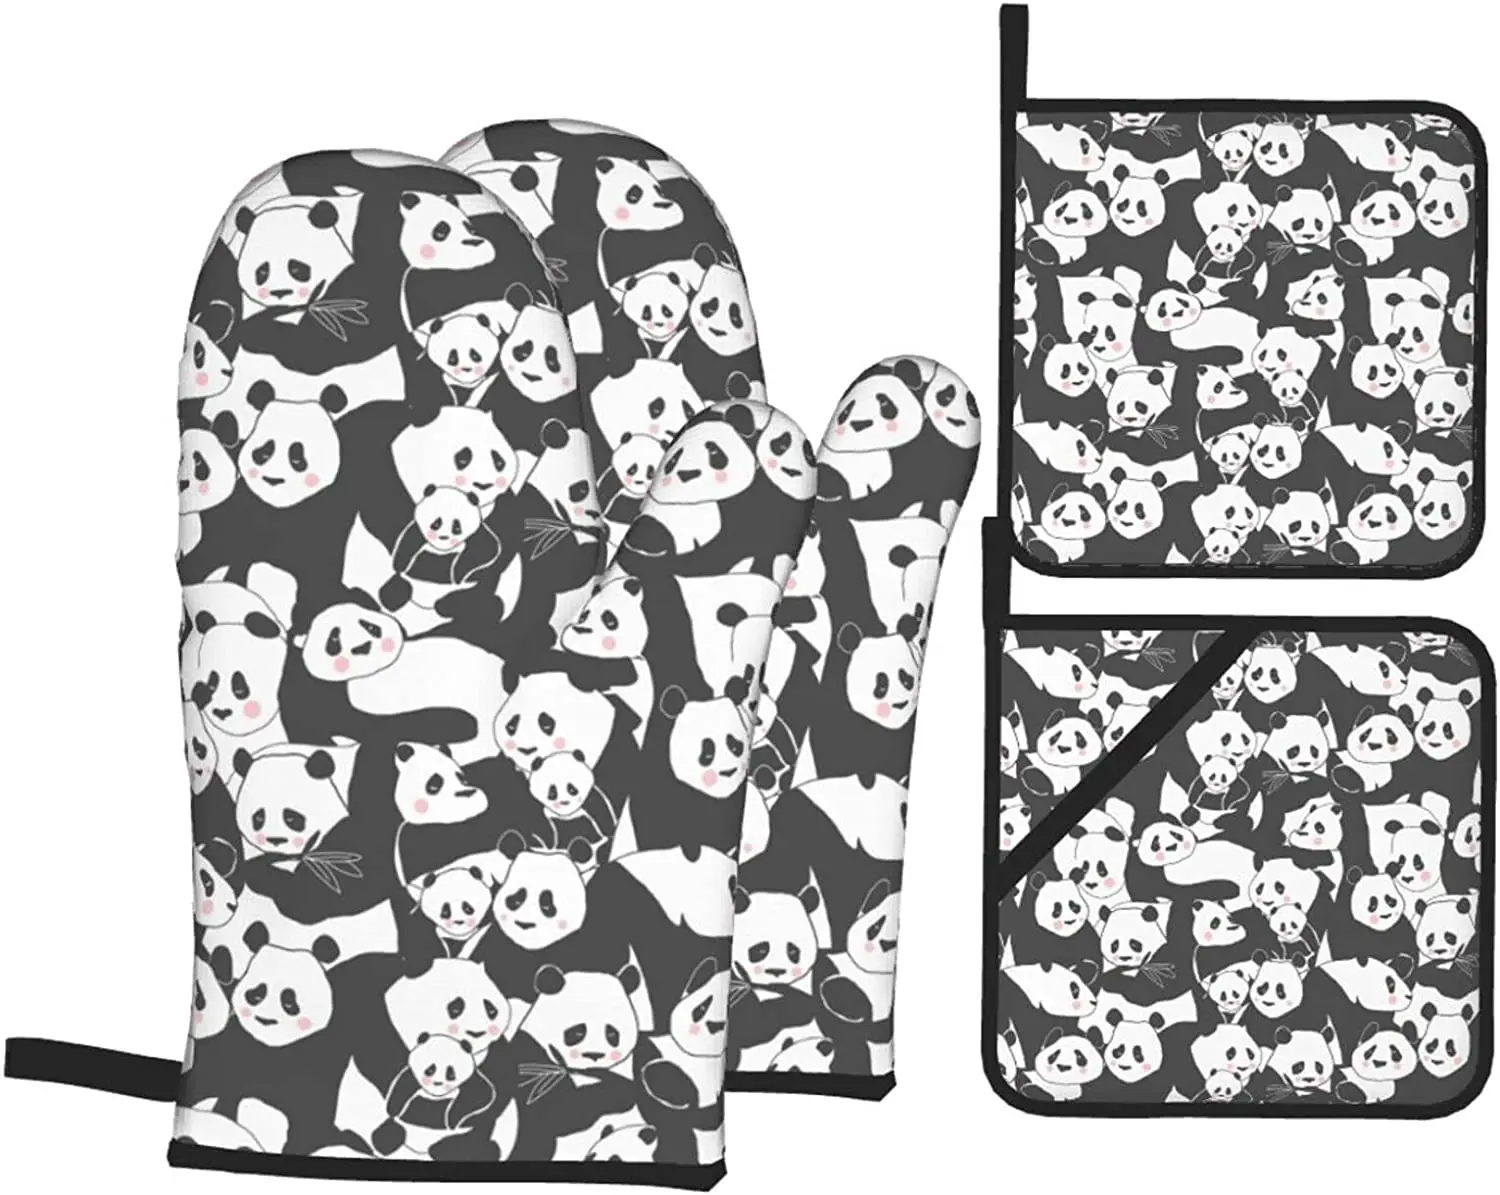 

Cute Panda Bear Oven Mitts and Pot Holders Sets Heat Resistant Hot Pads Cooking Gloves Handling Kitchen Cookware Bakeware BBQ